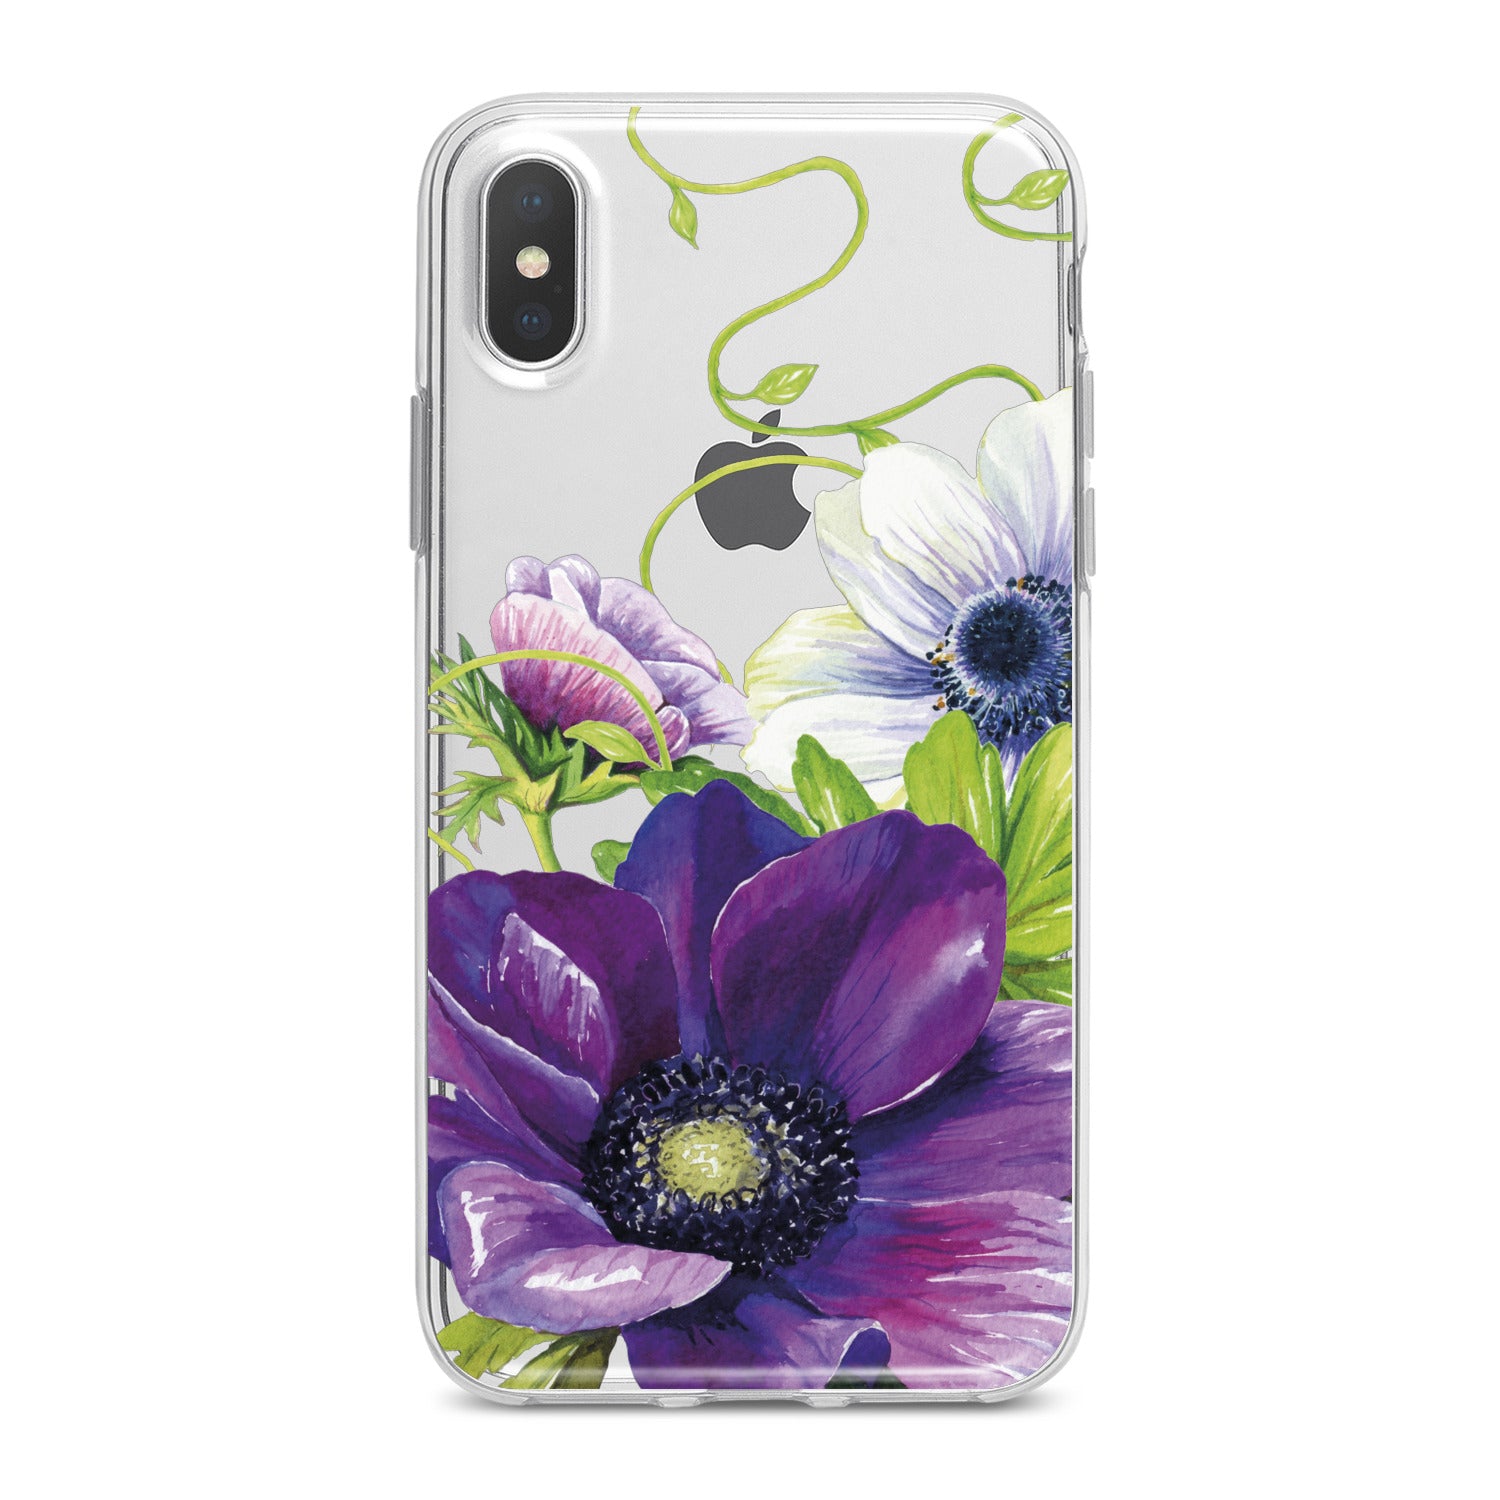 Lex Altern Purple Flower Phone Case for your iPhone & Android phone.